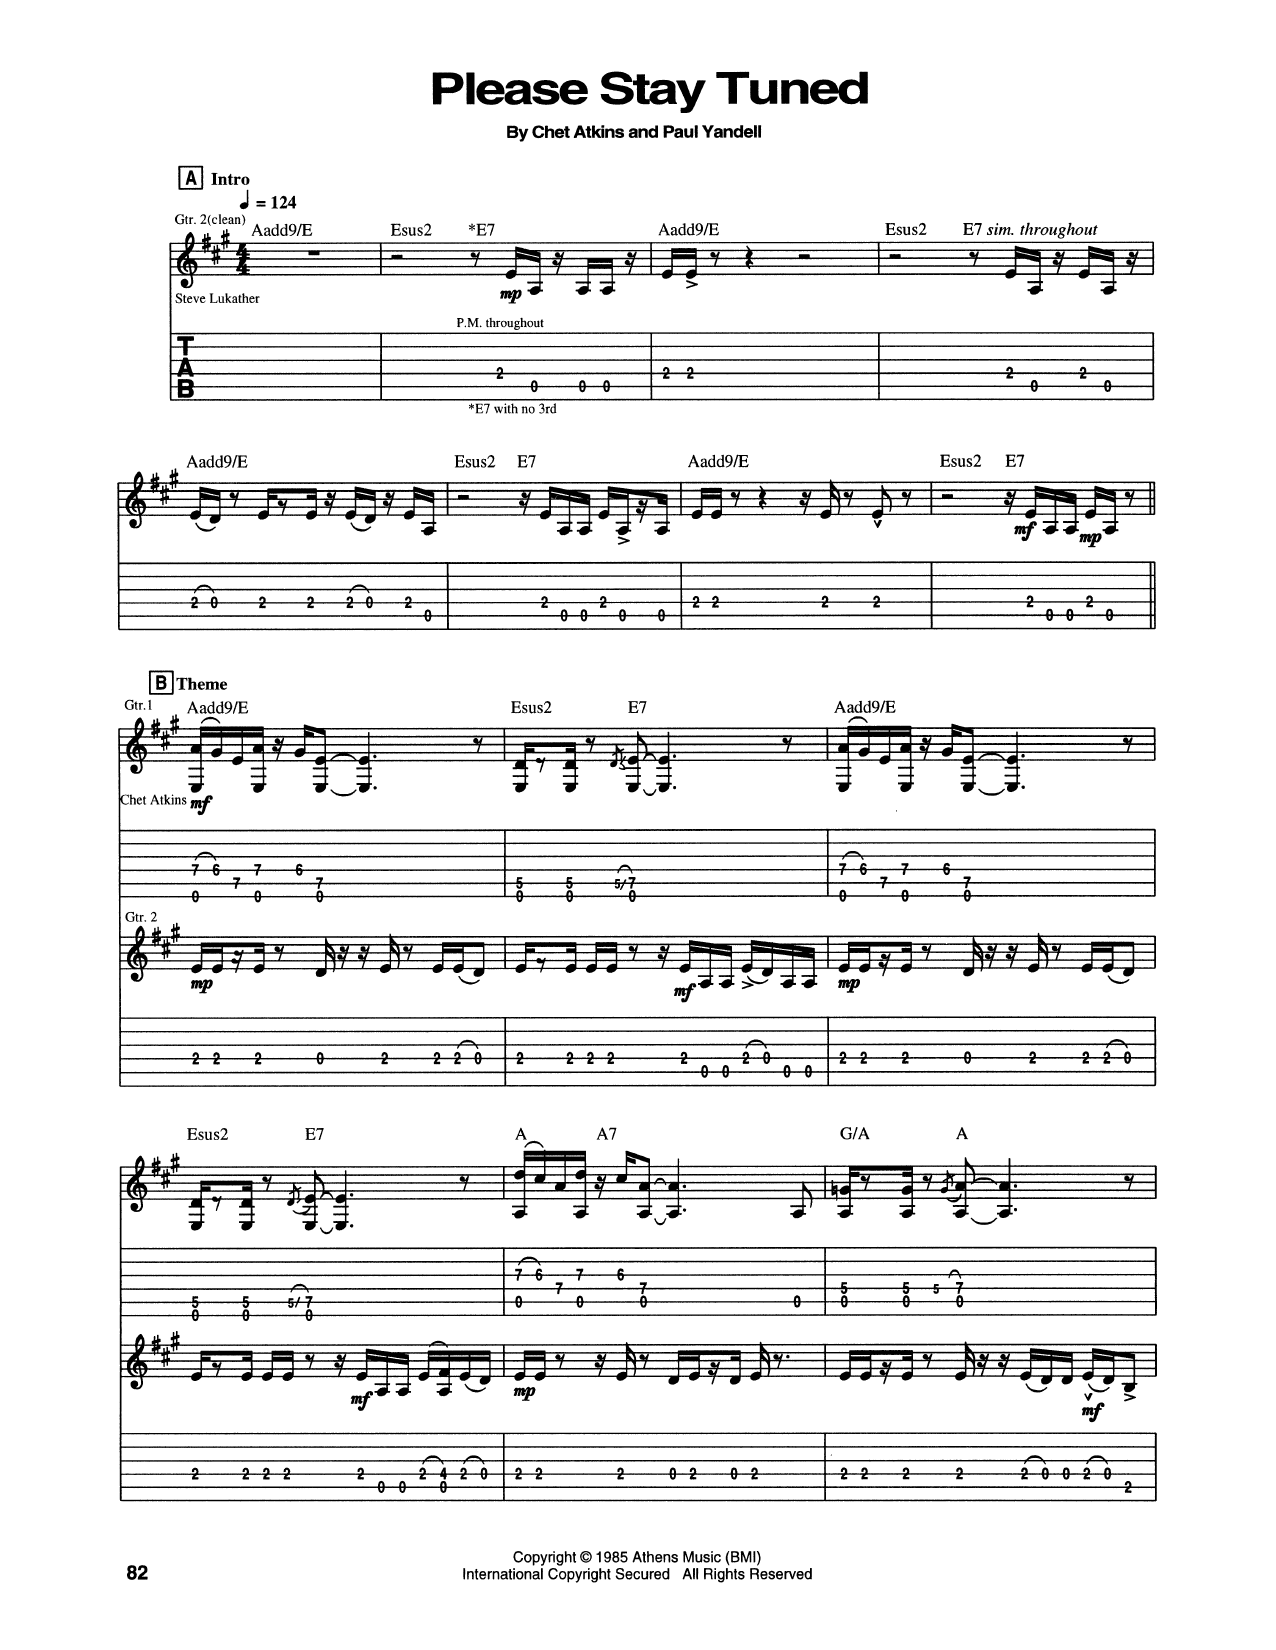 Download Chet Atkins Please Stay Tuned Sheet Music